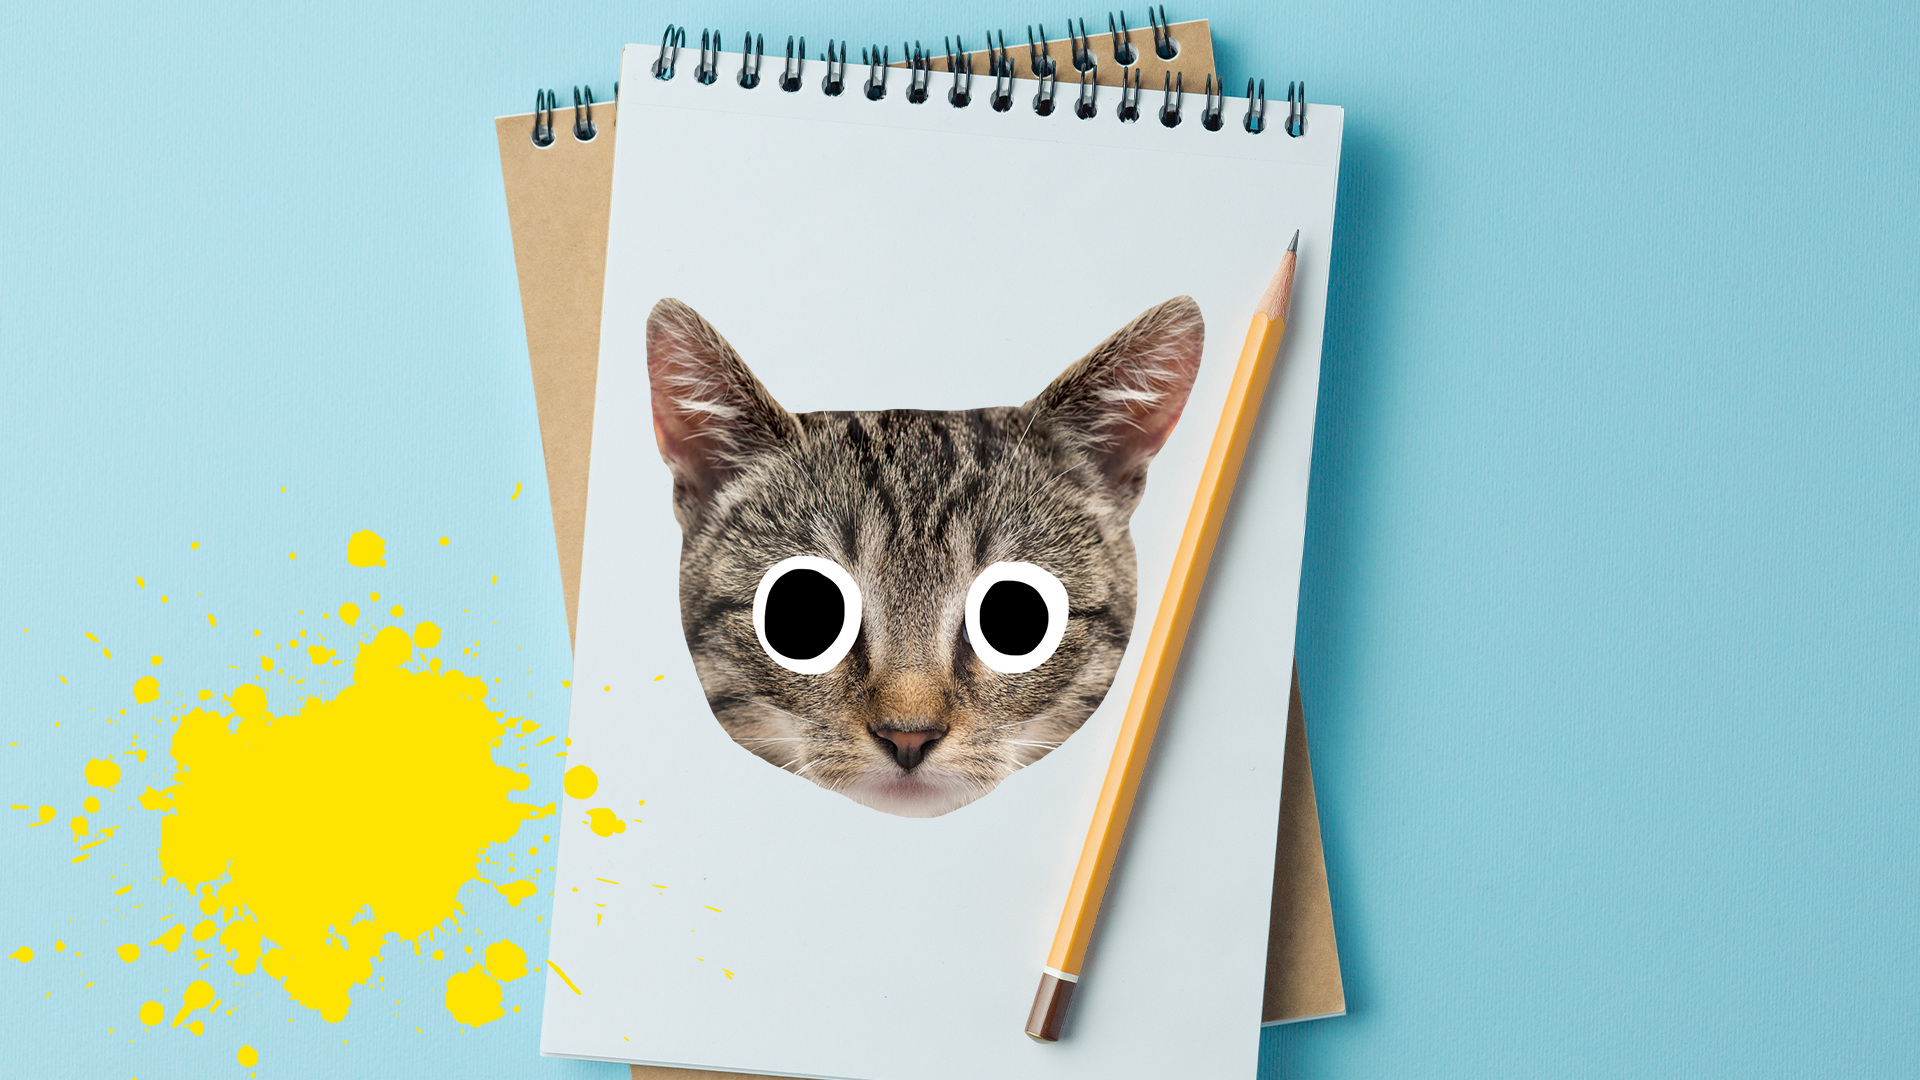 Pad, pen and Beano cat on blue background with yellow splats